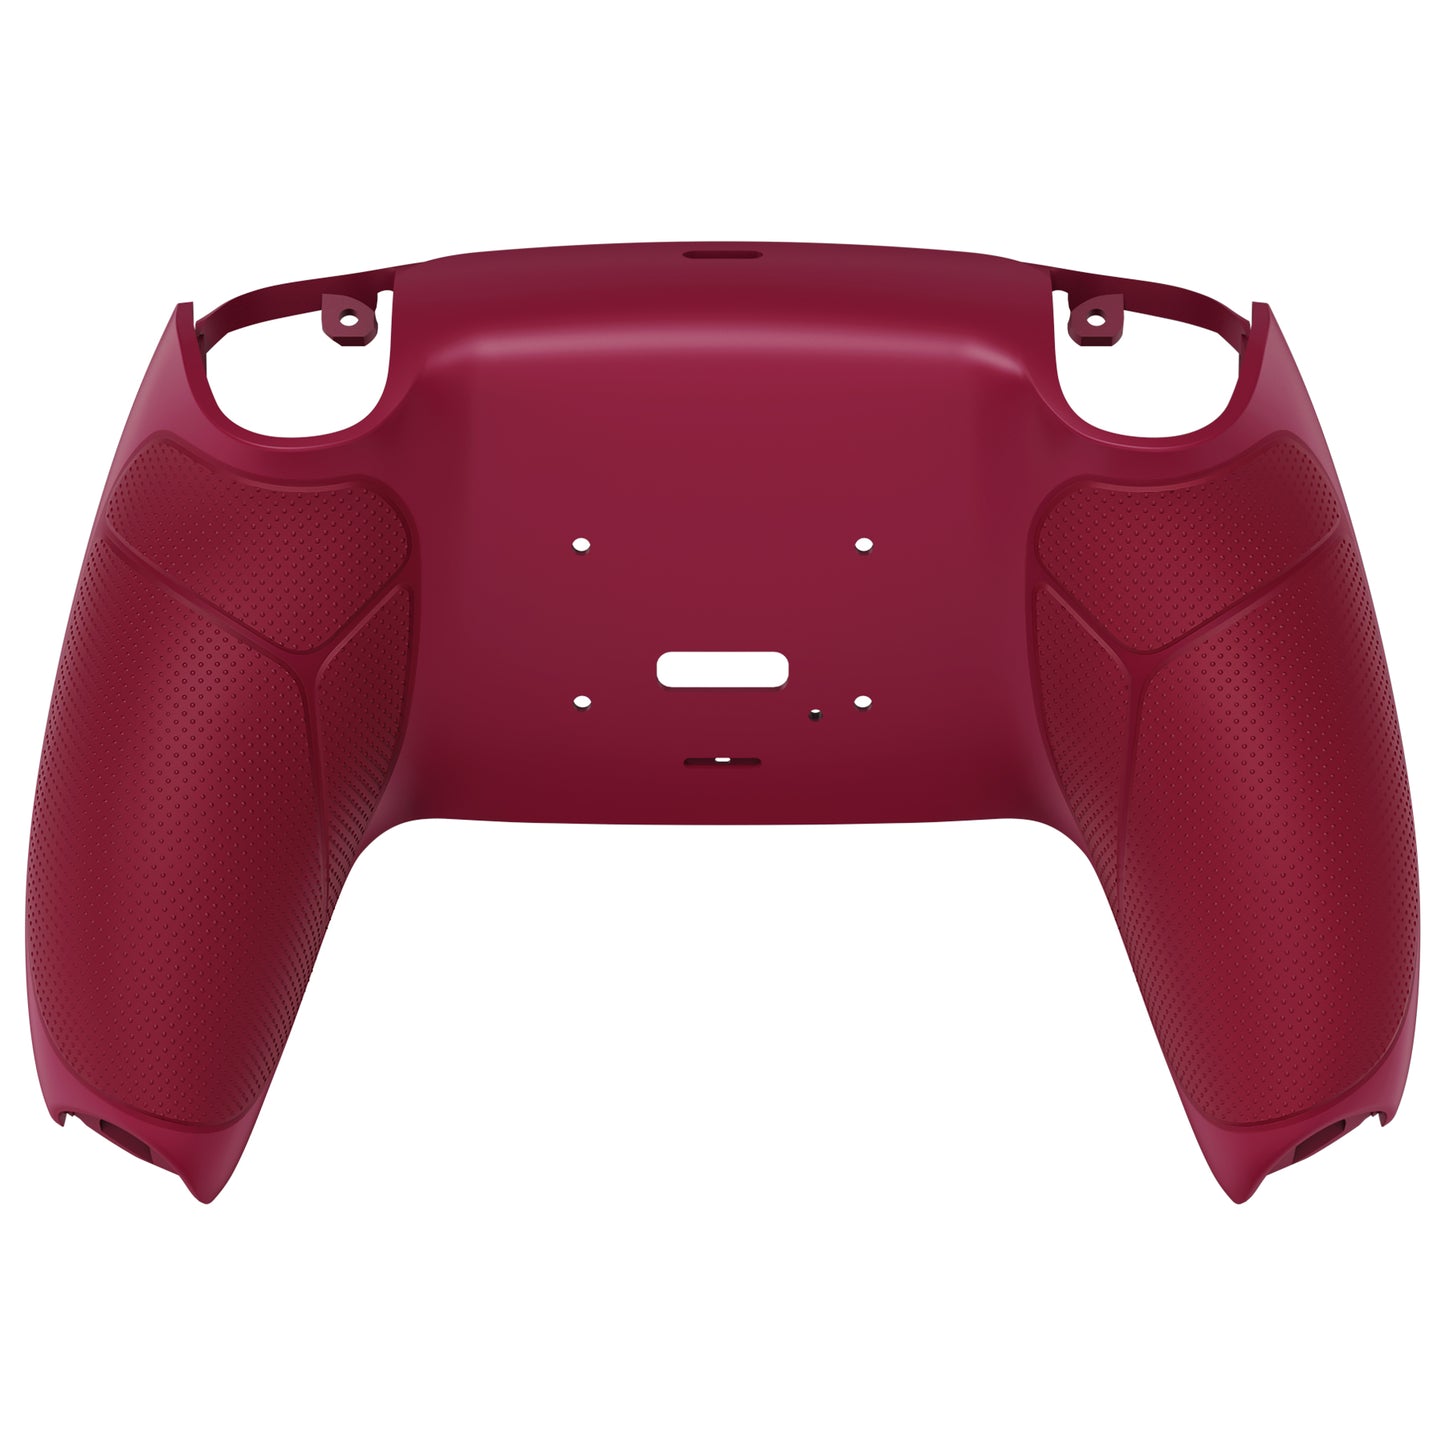 eXtremeRate Retail Cosmic Red Performance Rubberized Grip Redesigned Back Shell for PS5 Controller eXtremerate RISE Remap Kit - Controller & RISE Remap Board NOT Included - UPFU6008